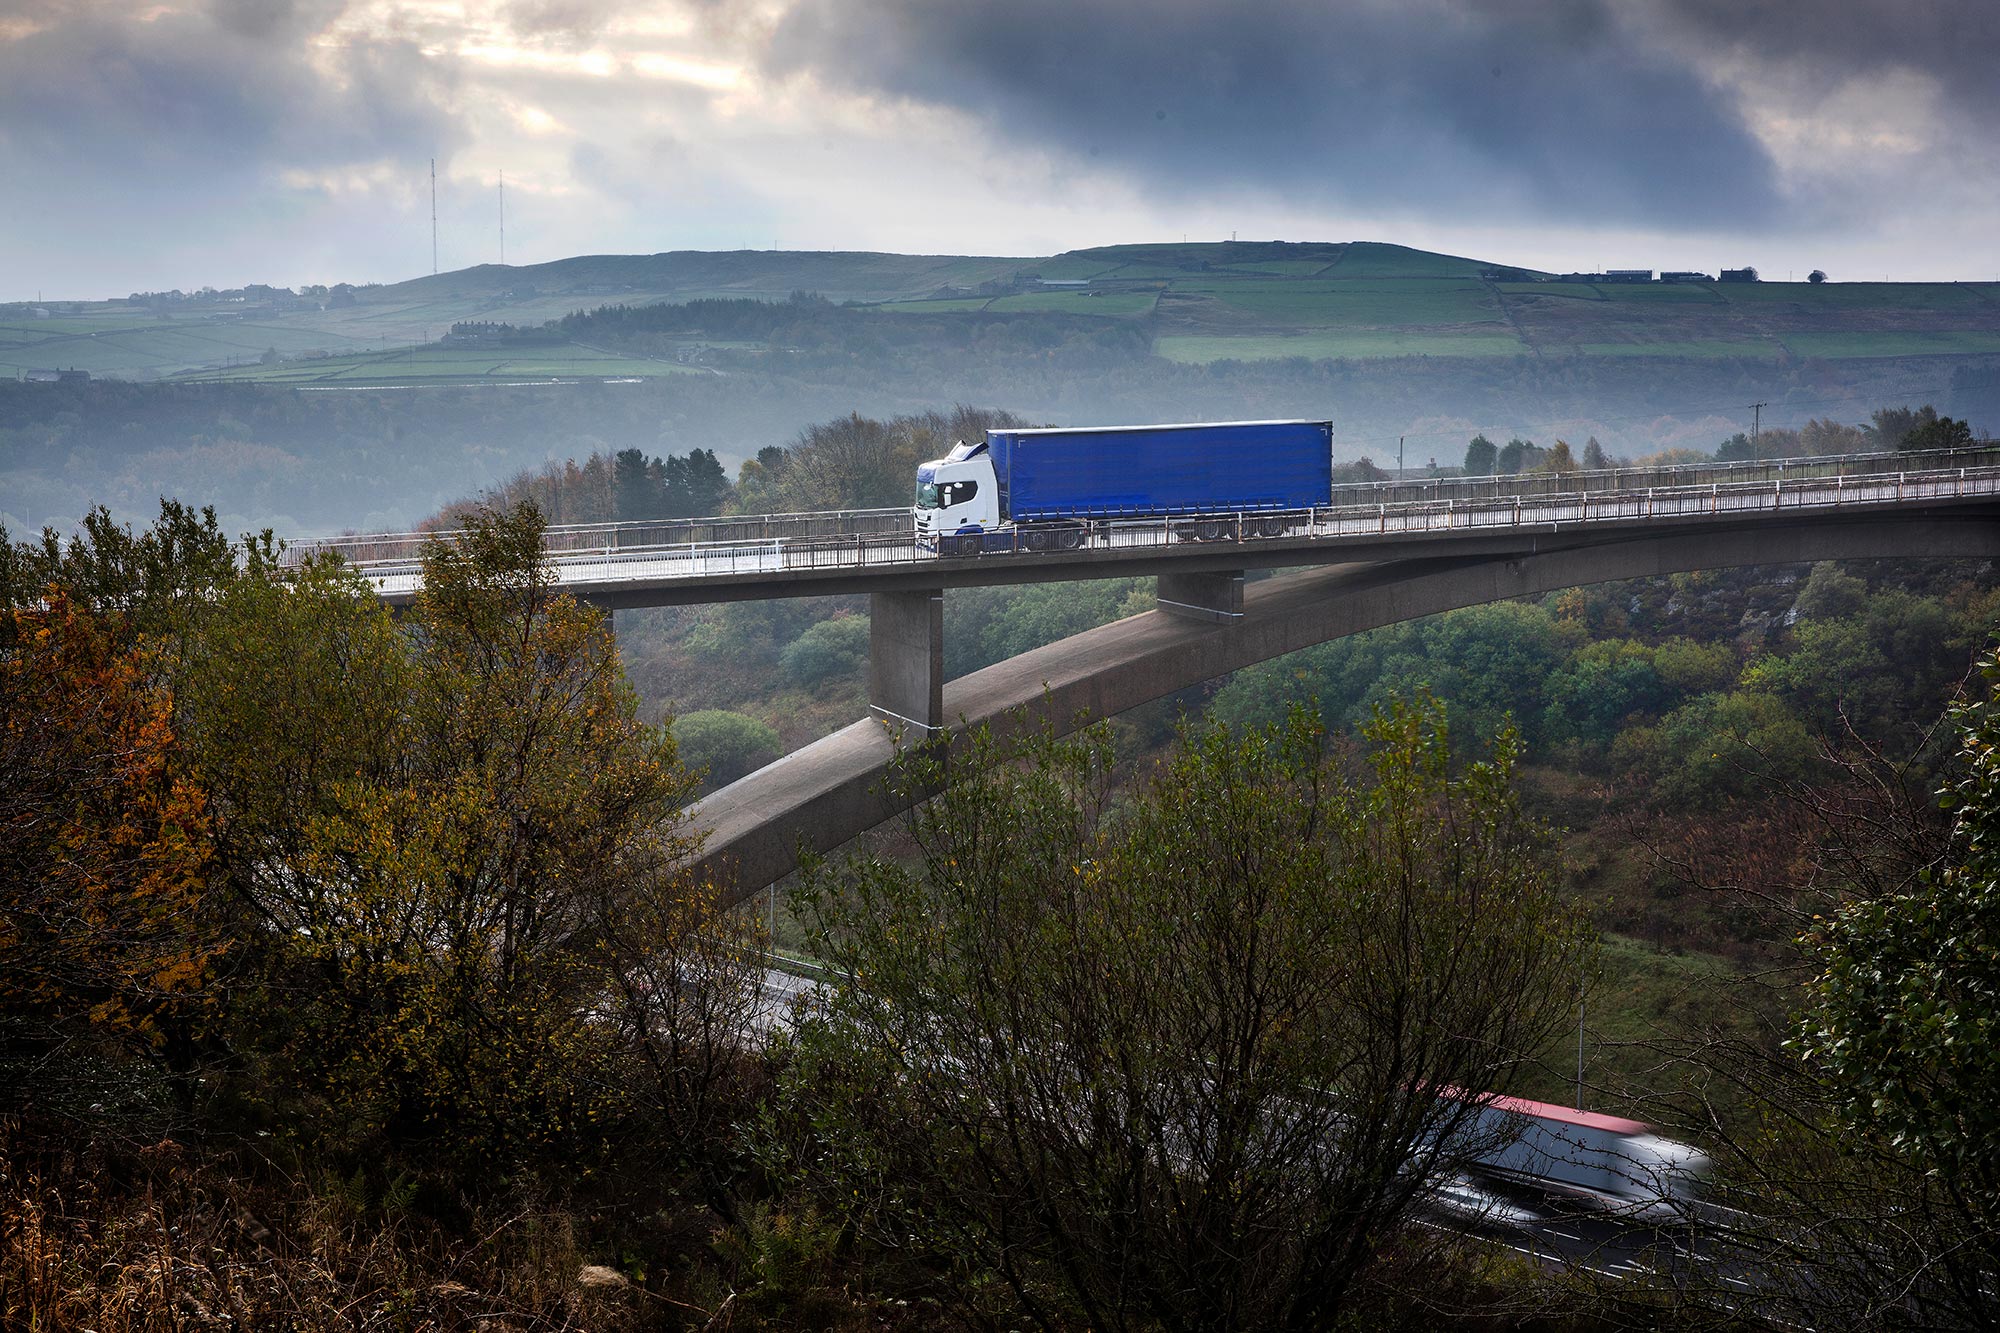 HGV Driving in High Winds: Safety, Planning & Guidance